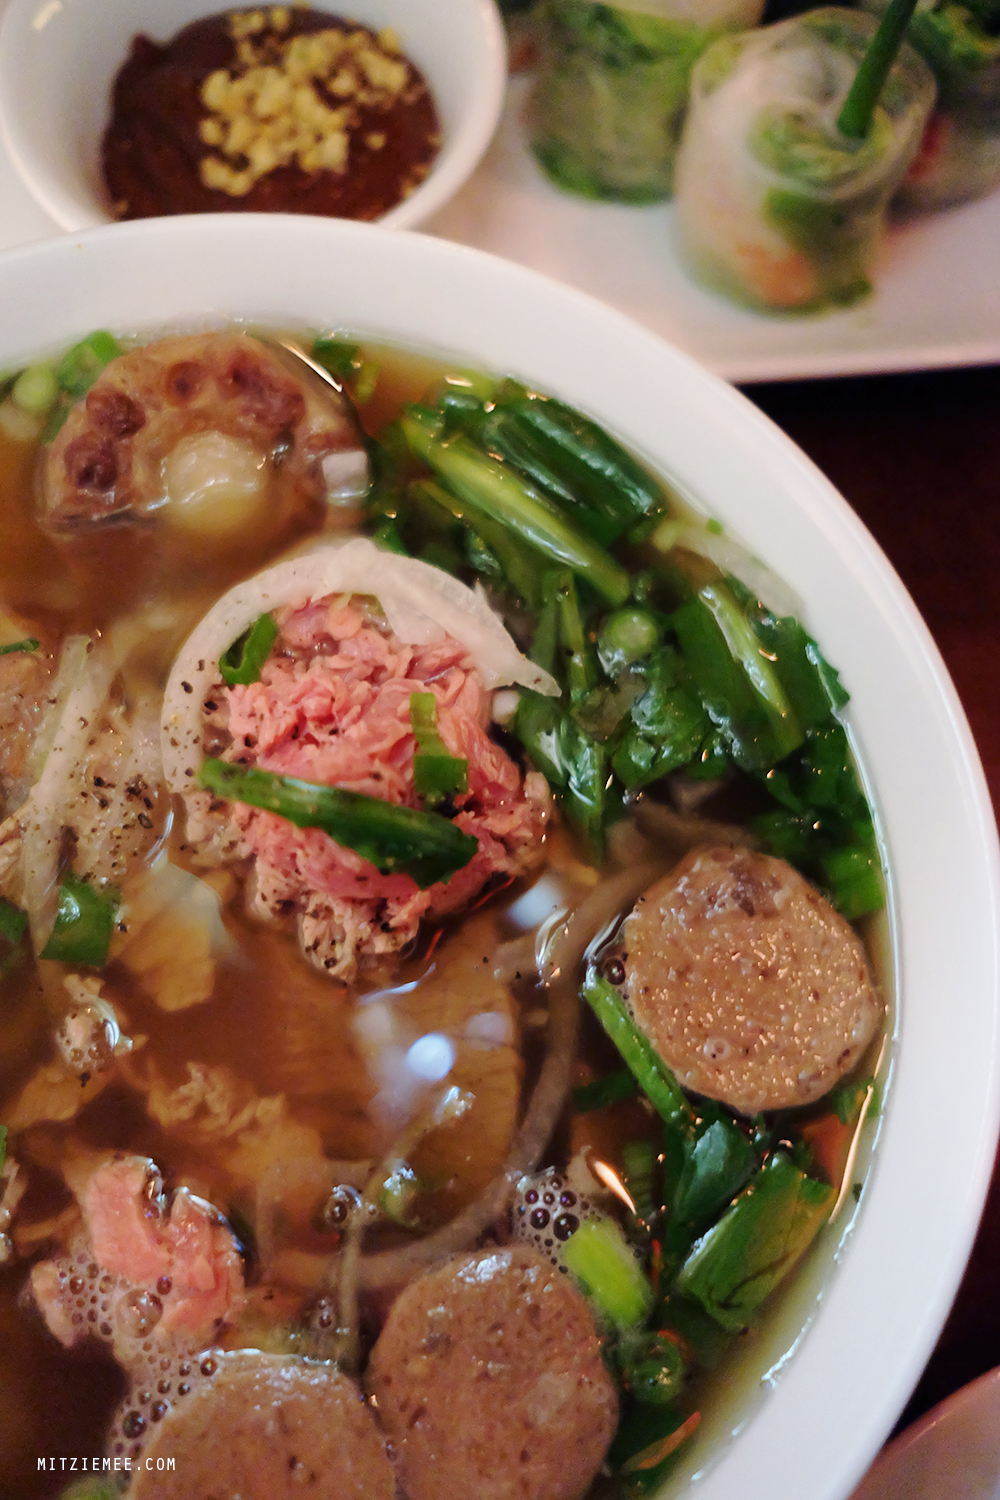 Pho Beef Deluxe at An Choi, Vietnamese restaurant, New York City